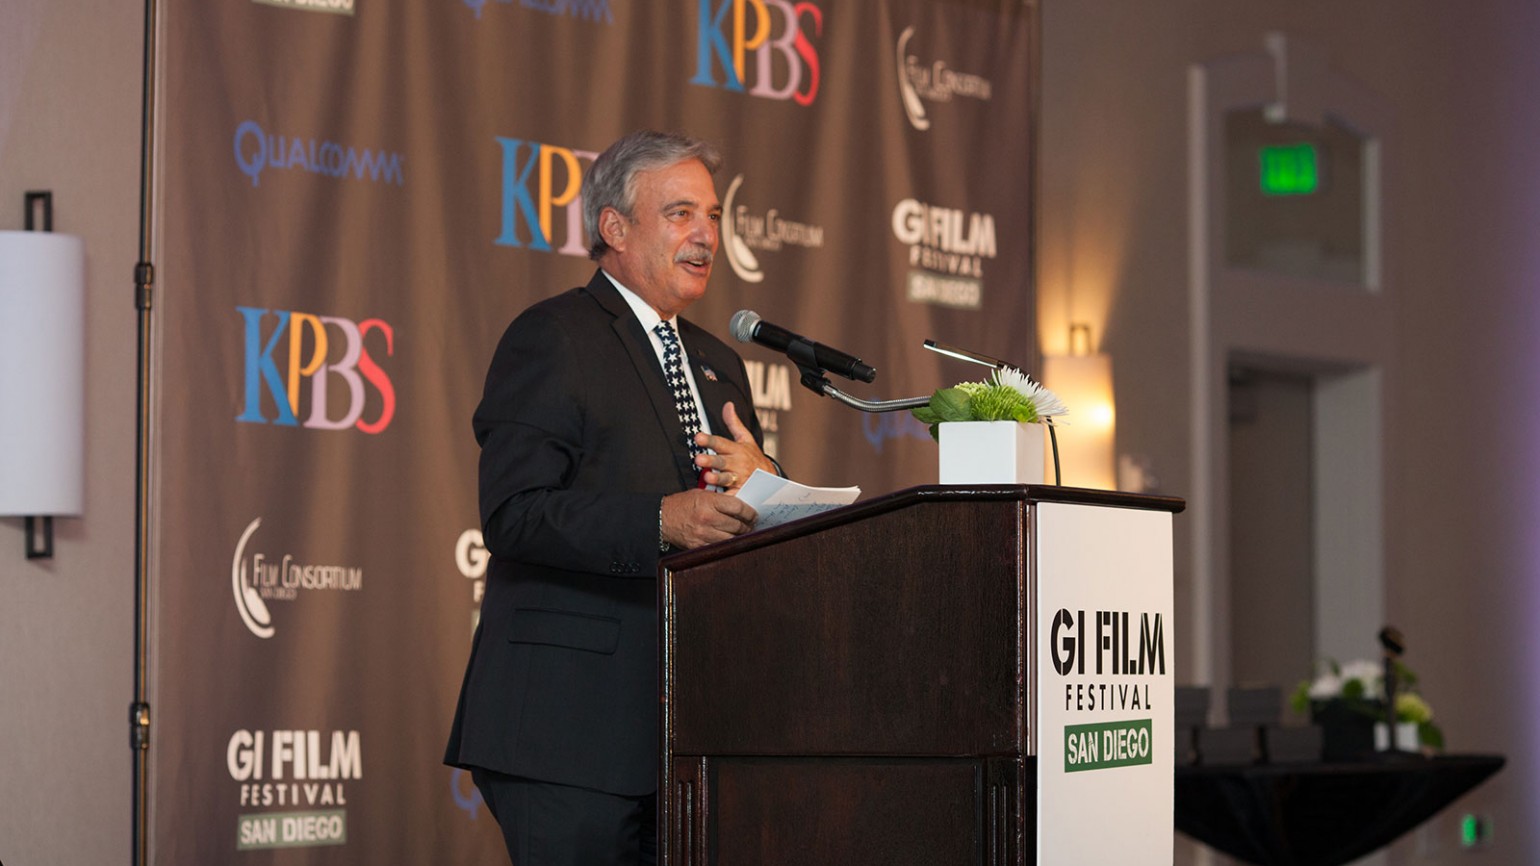 KPBS General Manager Tom Karlo remarks during the closing celebration.